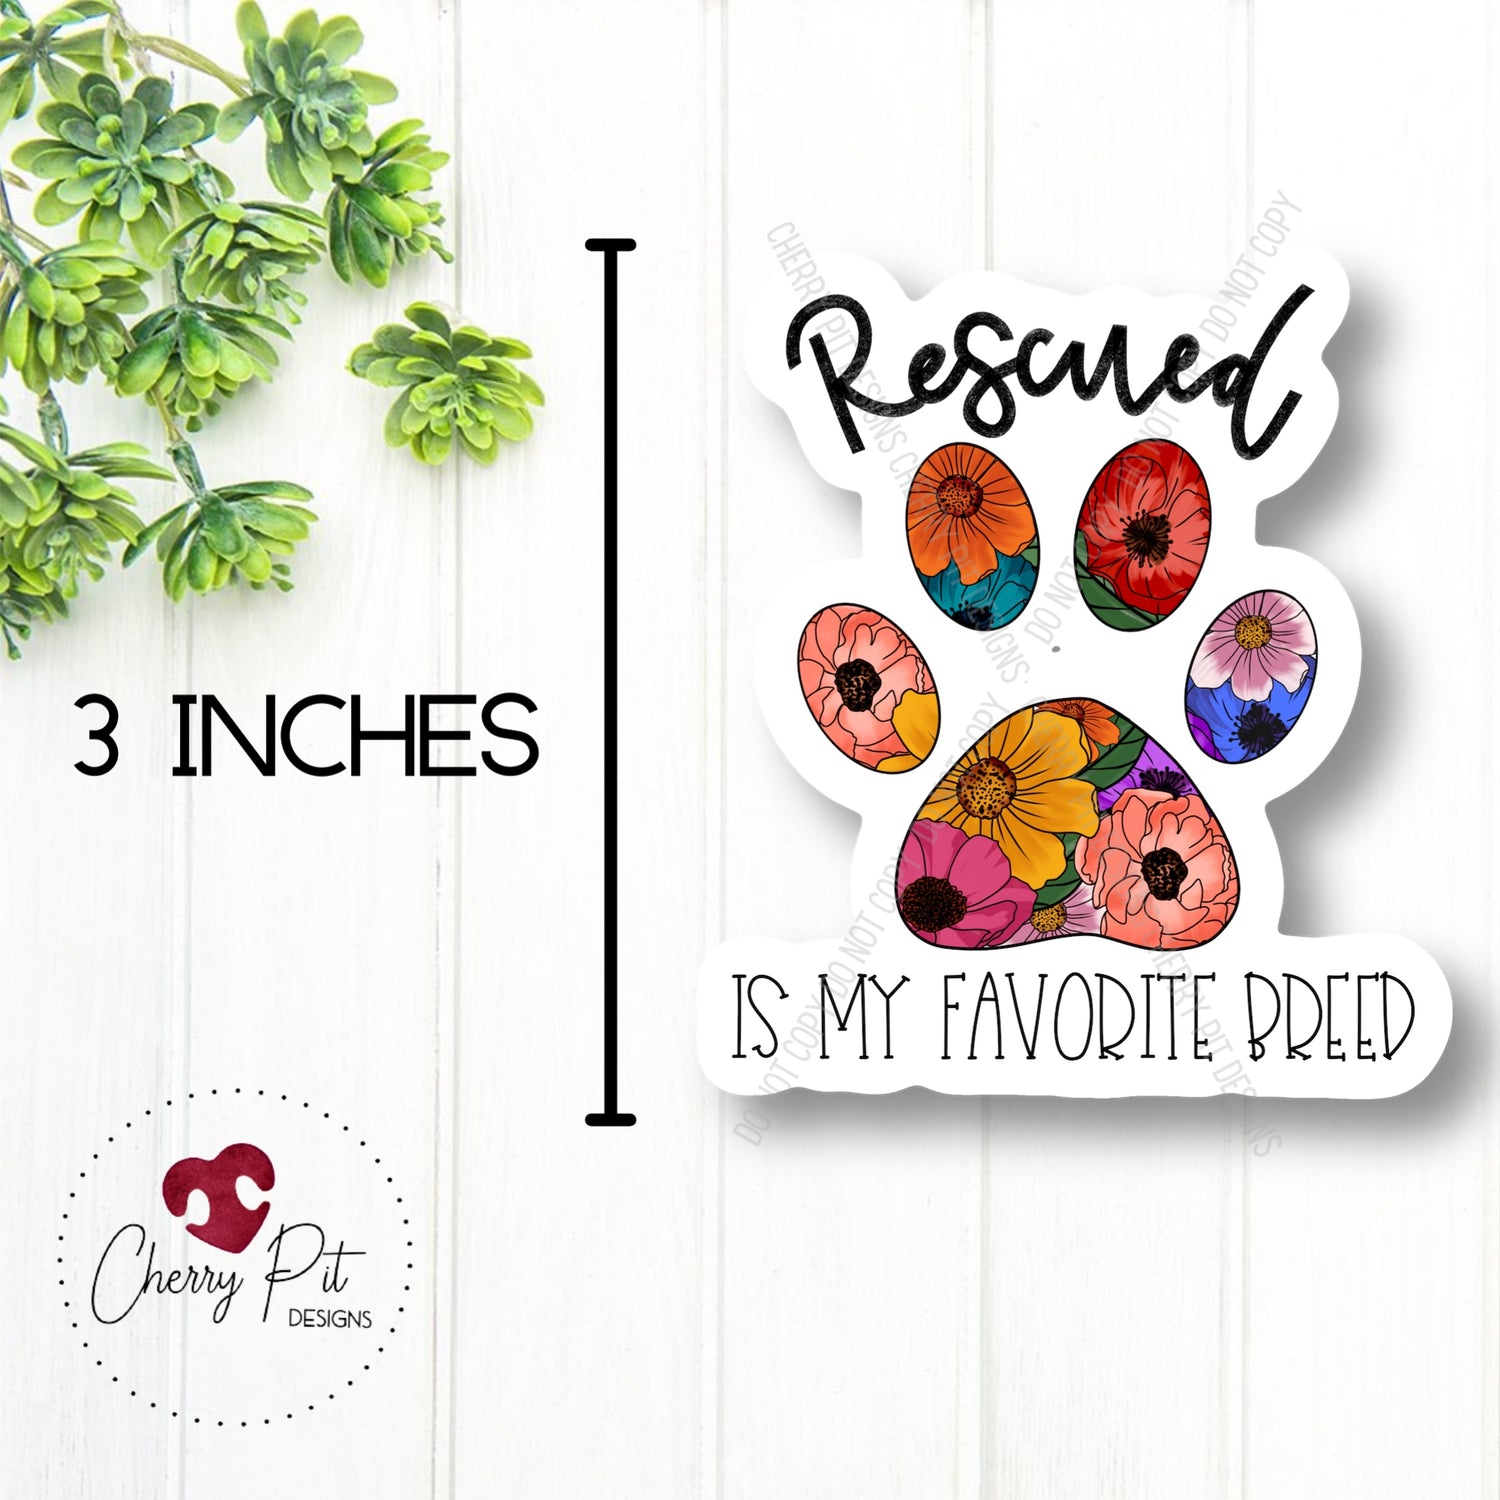 Rescued is My Favorite Breed Vinyl Sticker Decal - Cherry Pit Designs